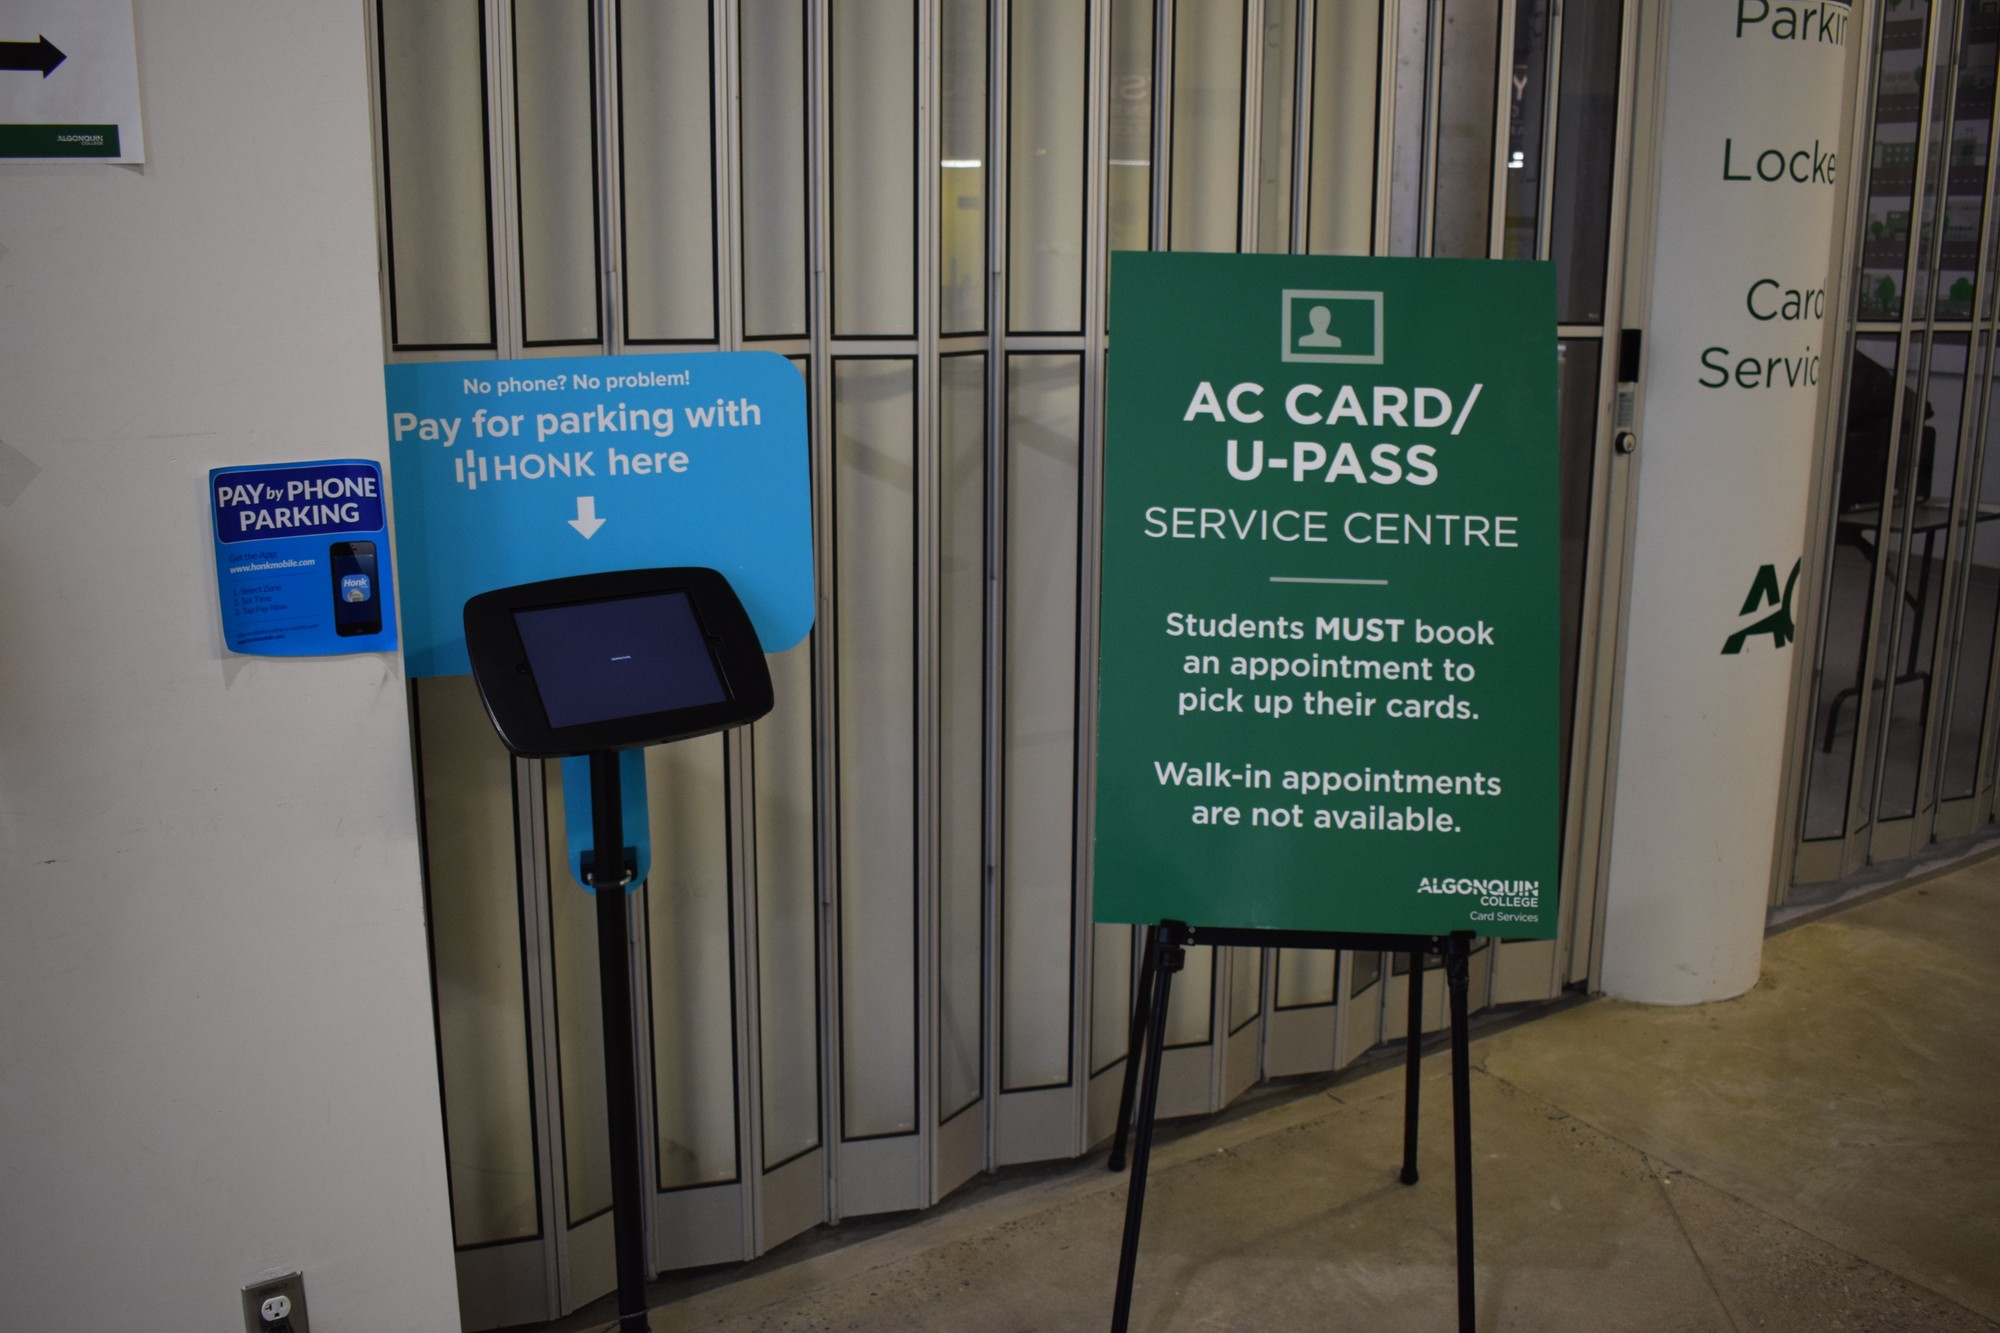 A sign outside the U-Pass service centre explains students must book an appointment in order to pick up their cards